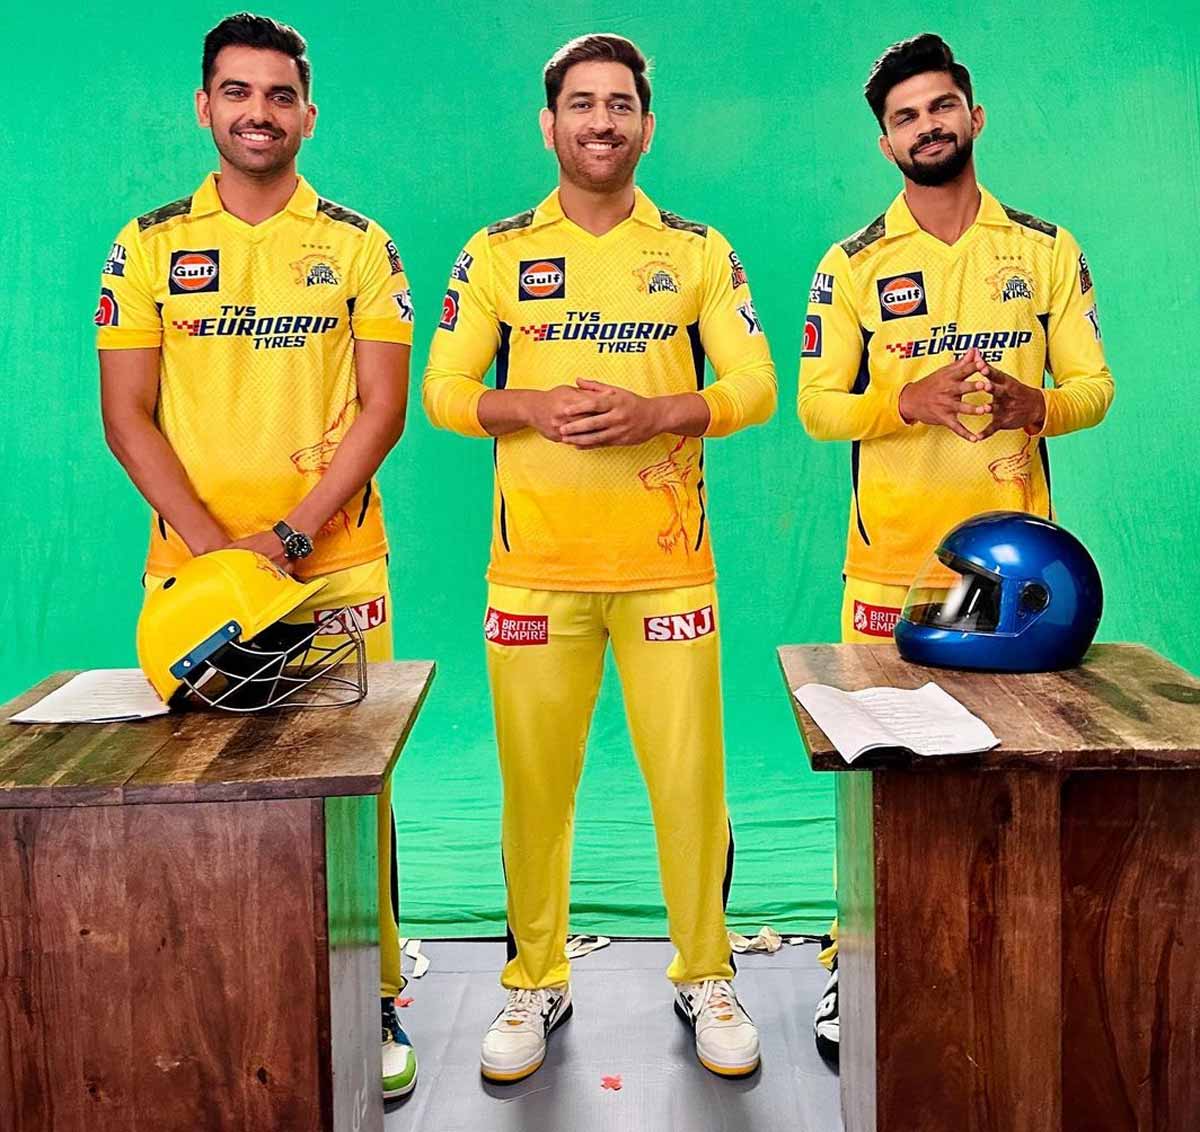 Delhi Capitals unveil their official jersey for IPL 2022 season